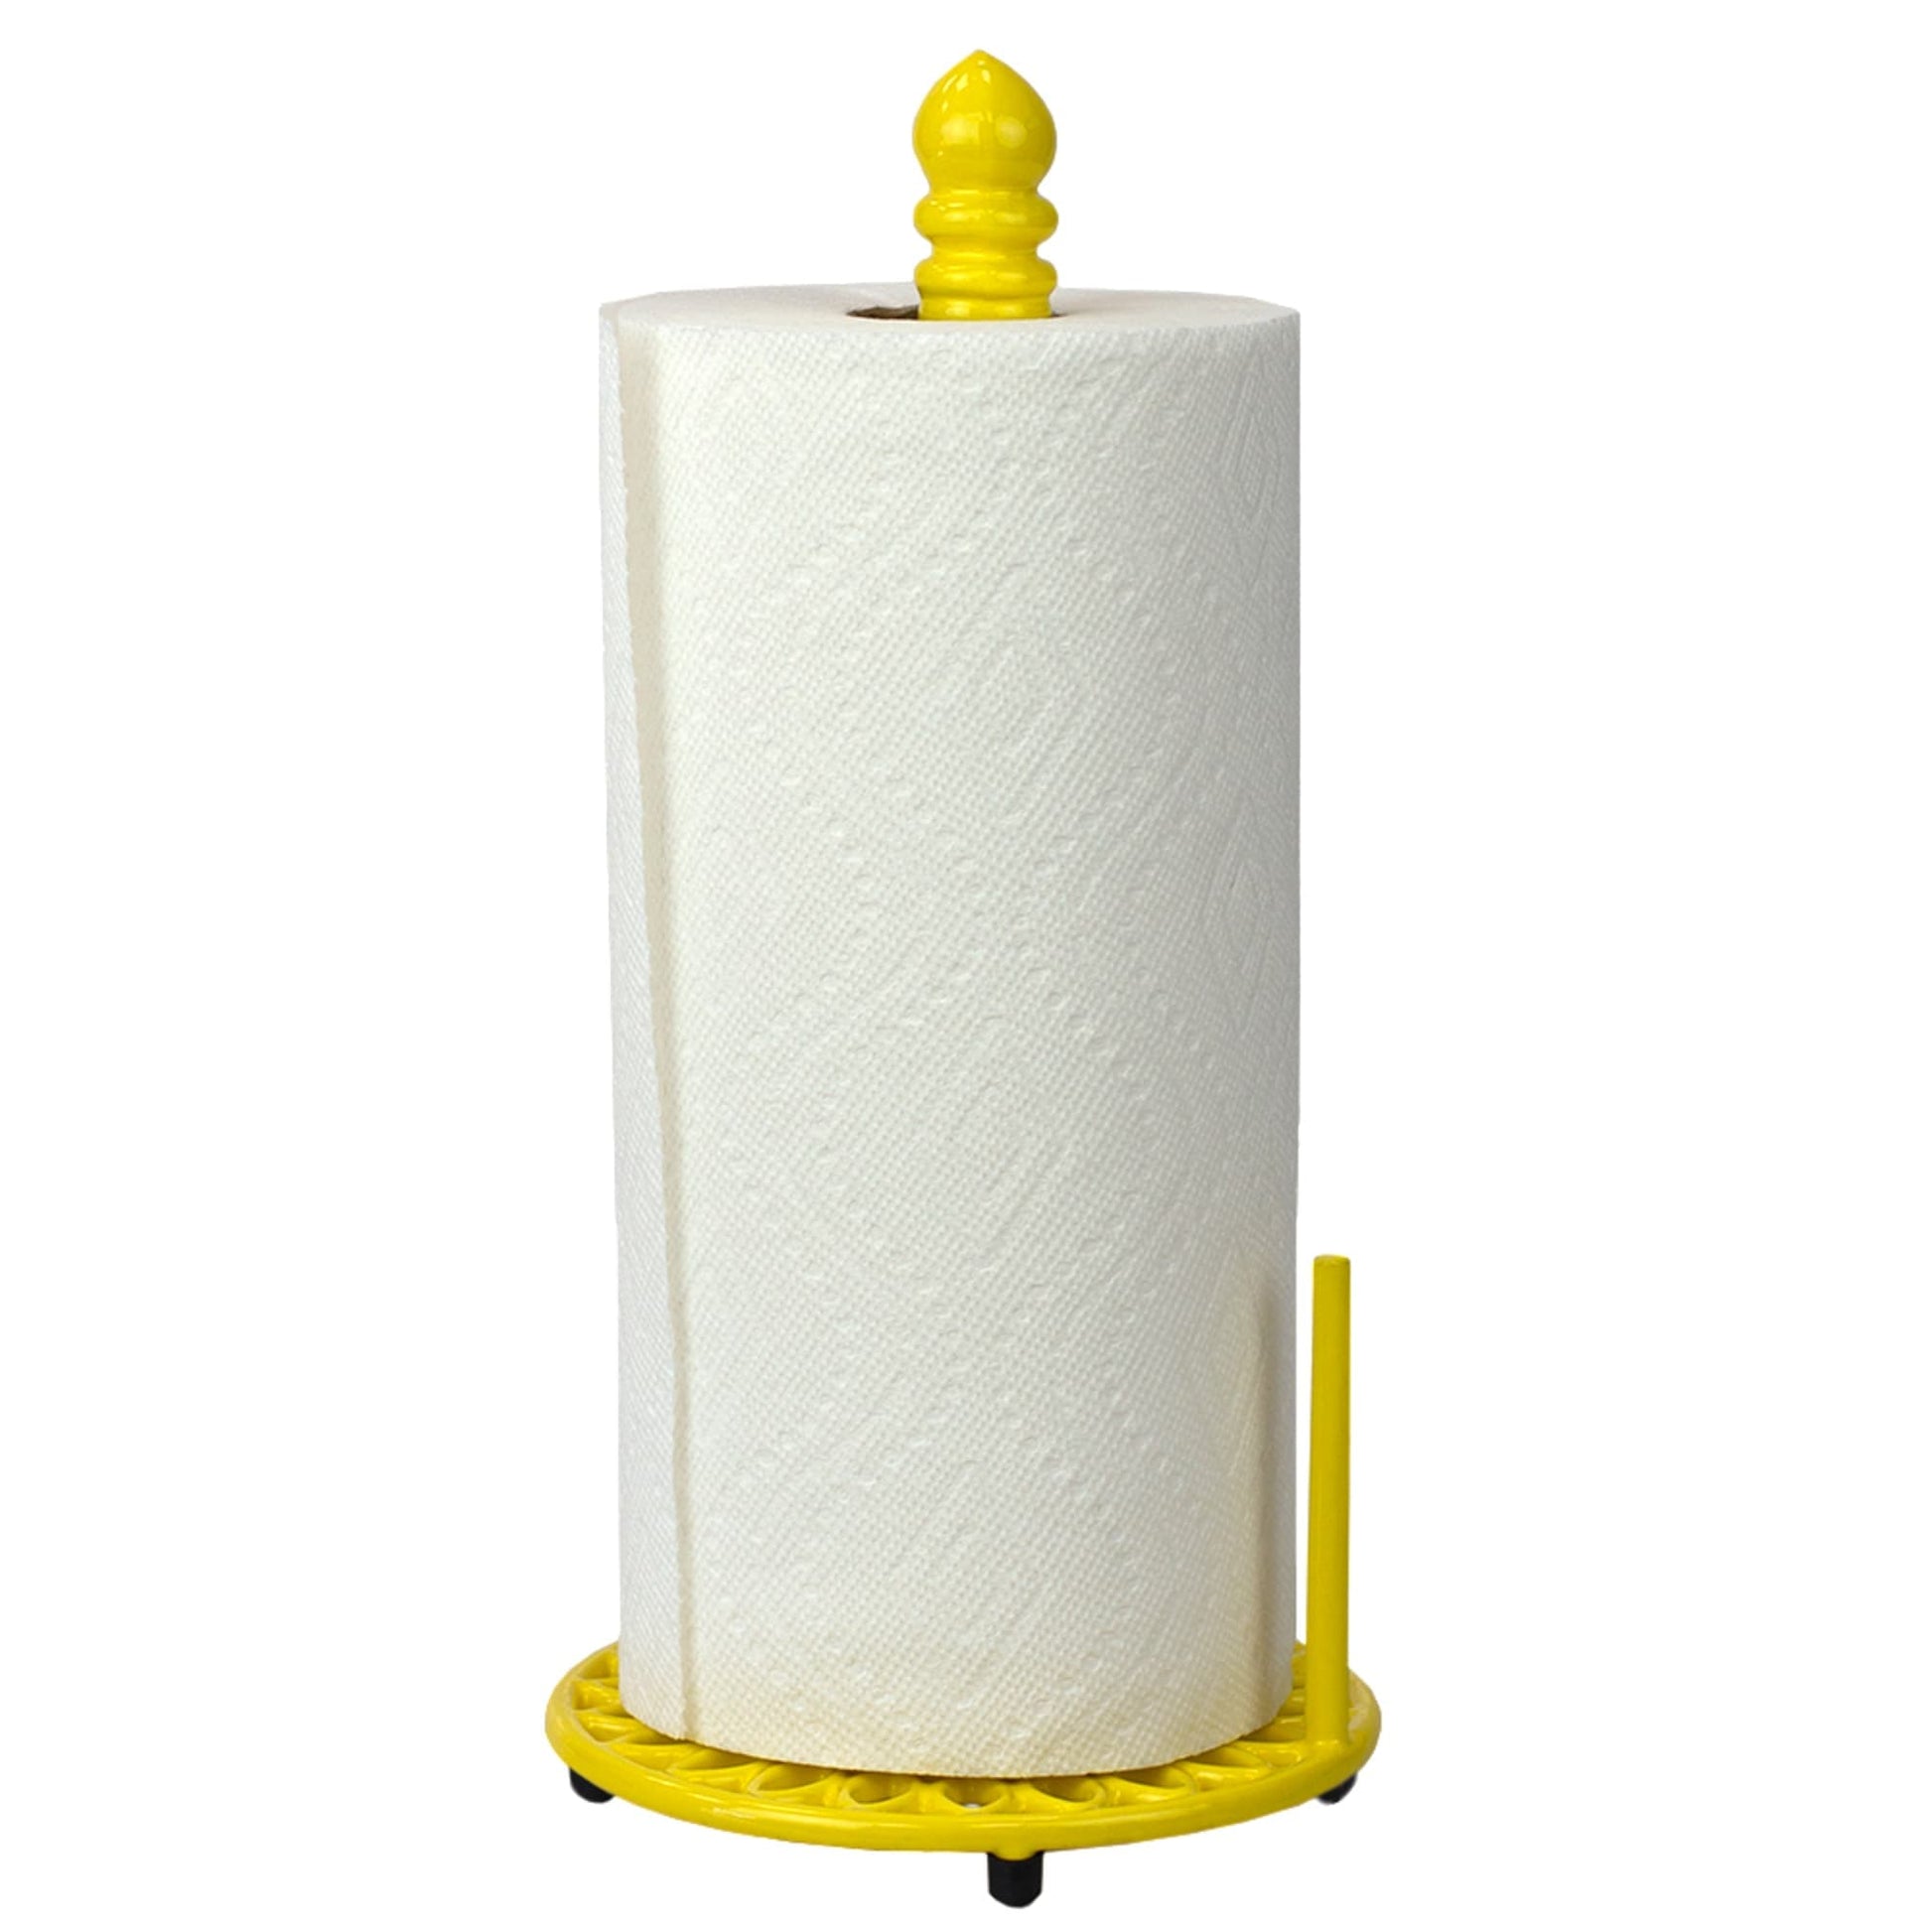 Home Basics Grove Free Standing Paper Towel Holder with Weighted Base and Padded Base, White